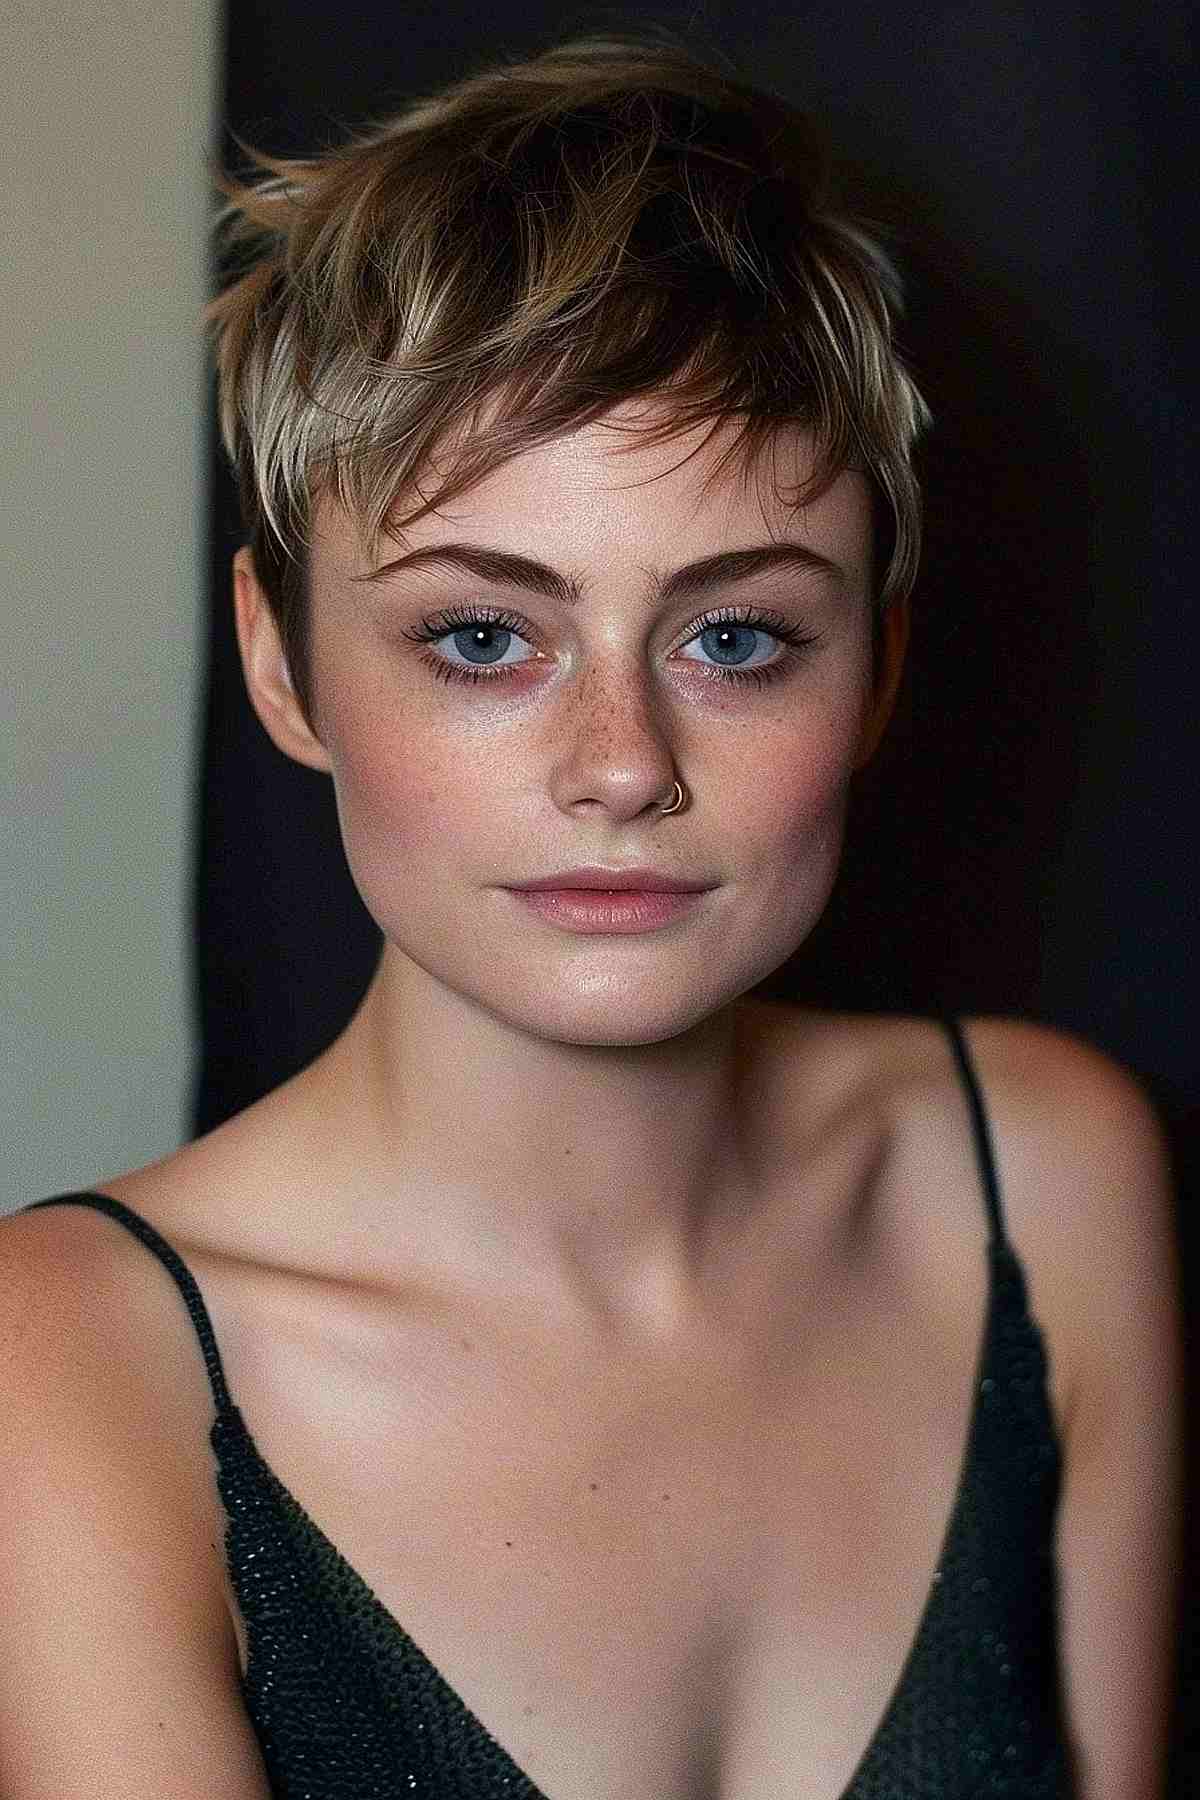 Short elf cut with pixie influence, featuring textured layers and blonde highlights.